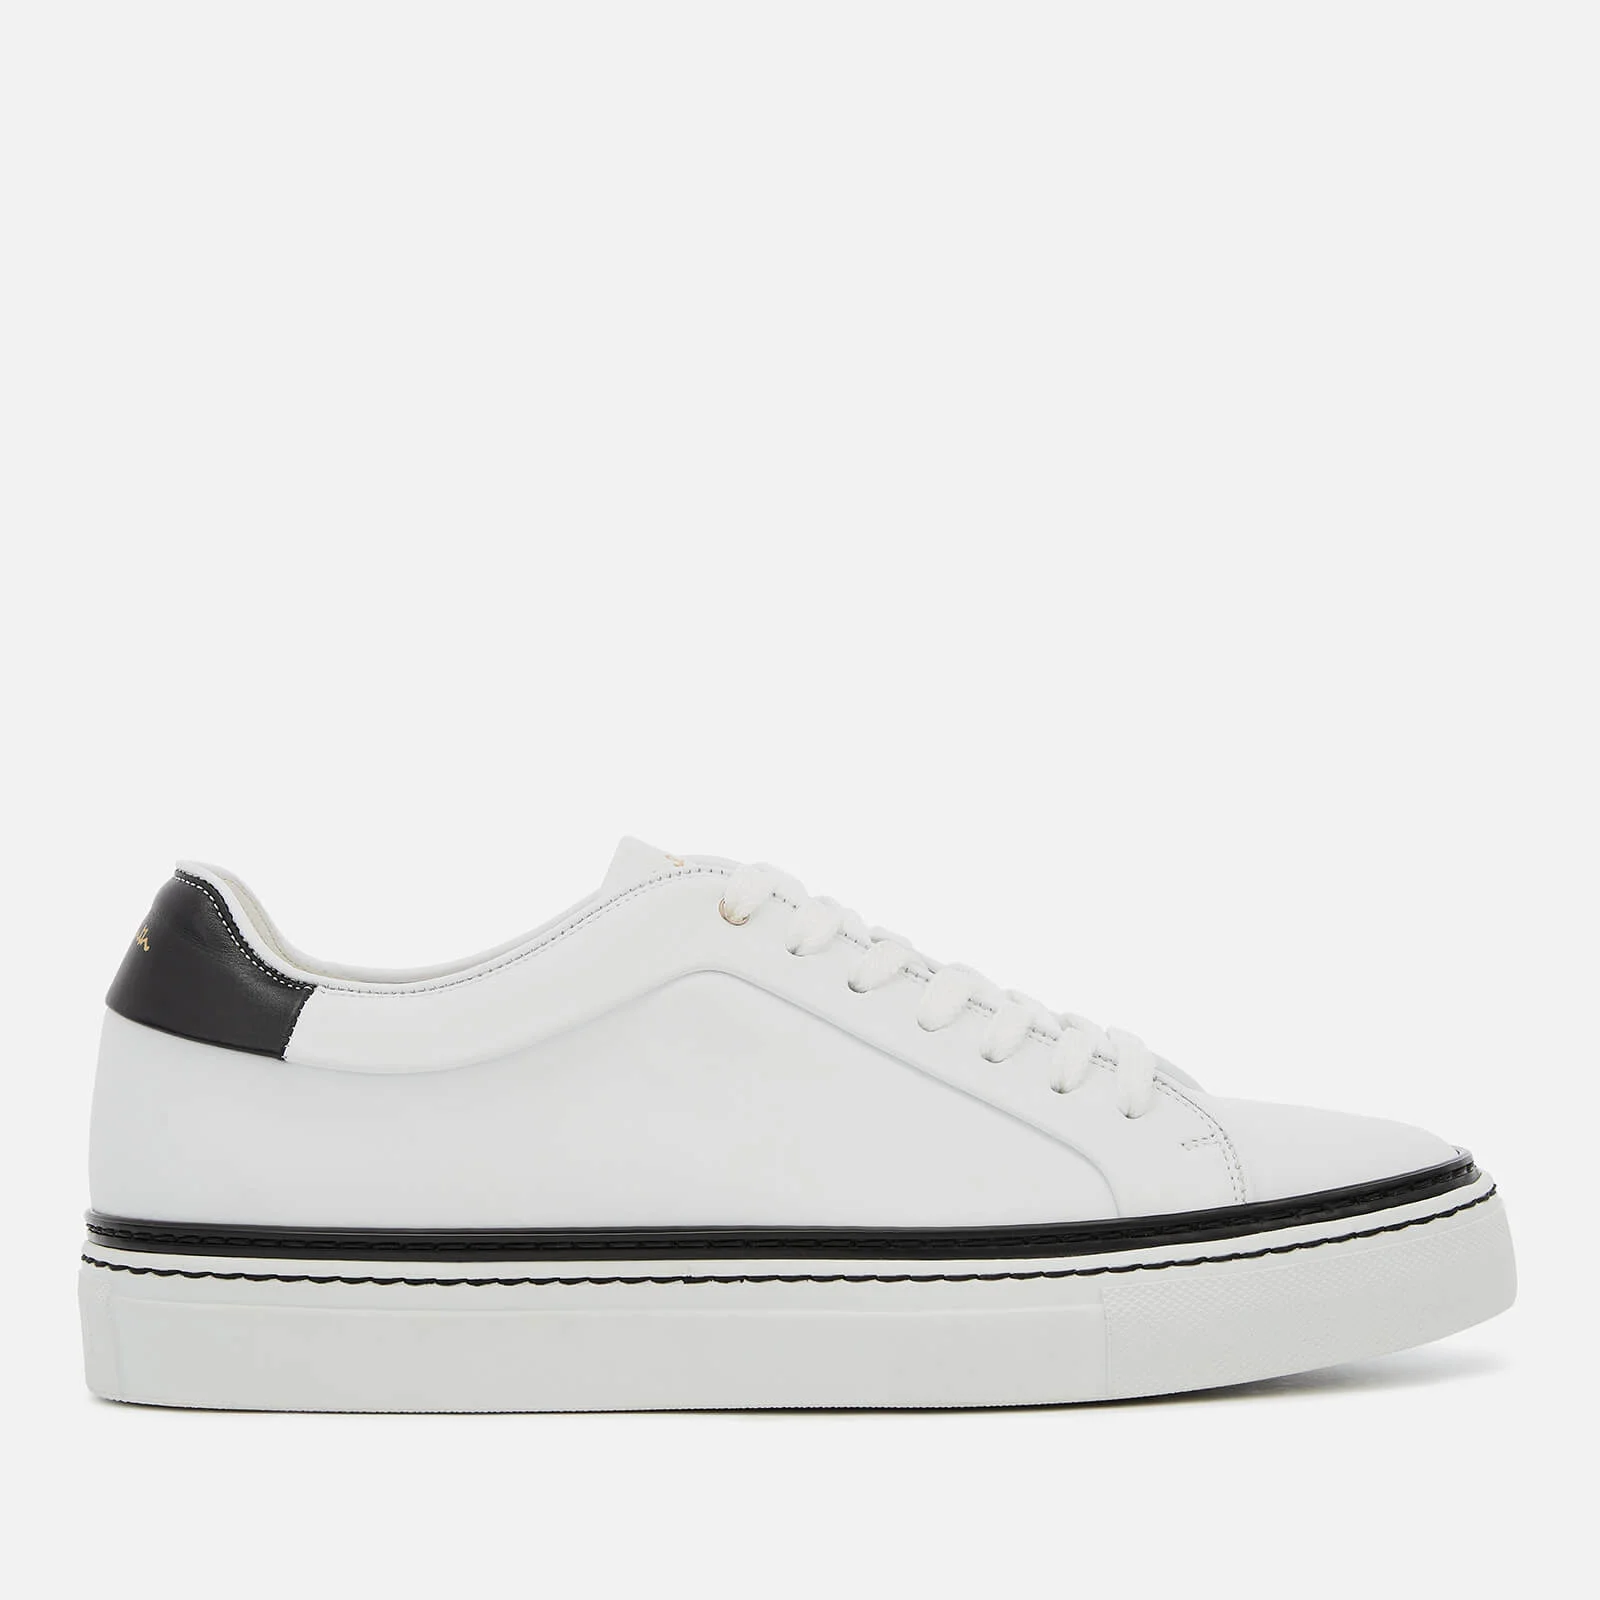 Paul Smith Men's Basso Leather Cupsole Trainers - White Black Tab Image 1